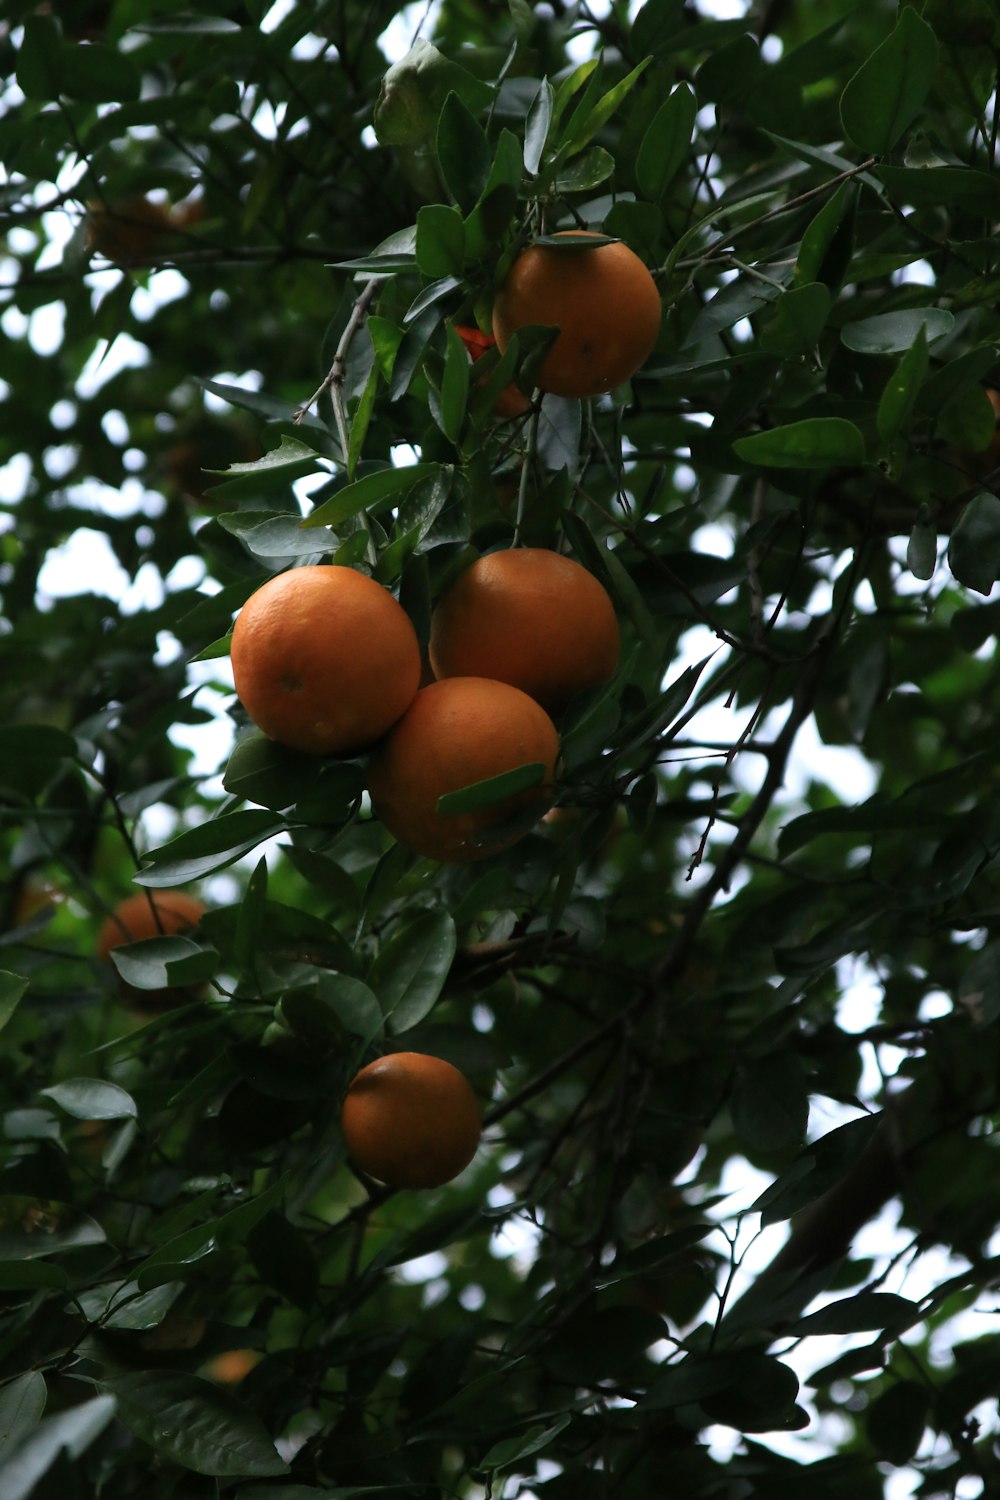 a tree filled with lots of ripe oranges